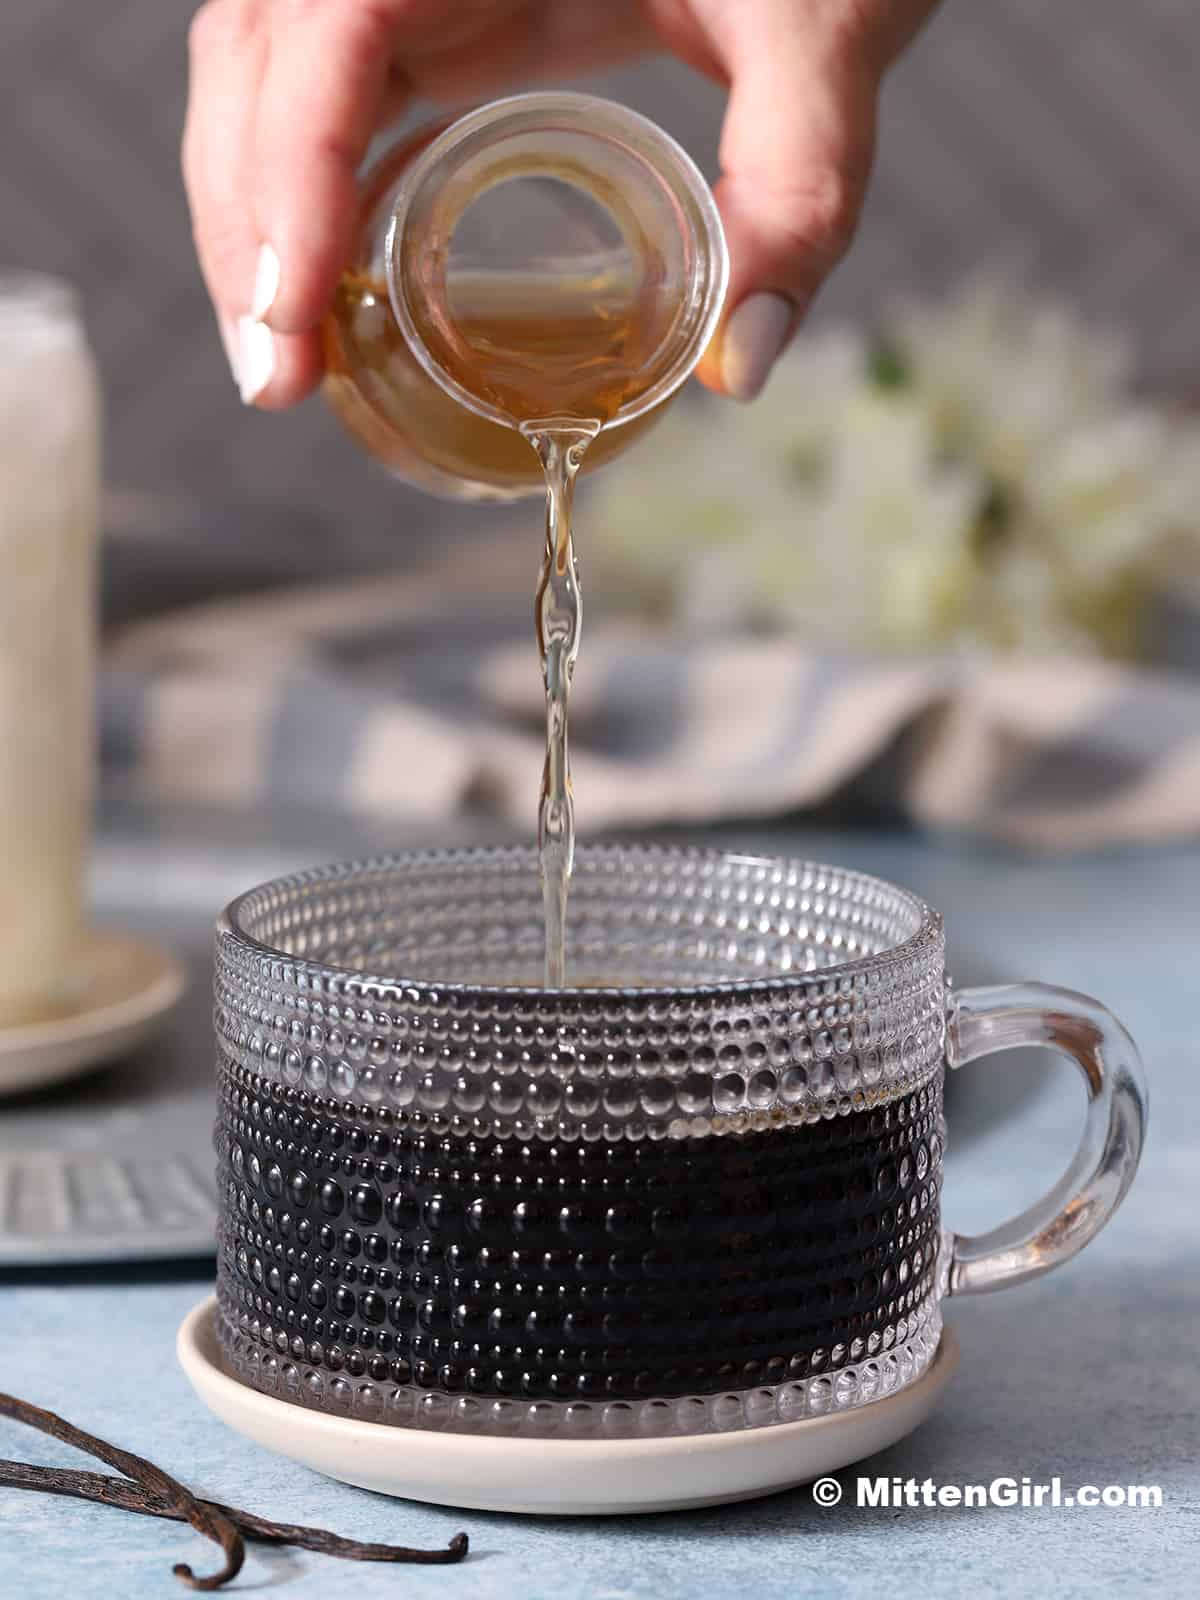 Vanilla syrup being poured into a cup of coffee.